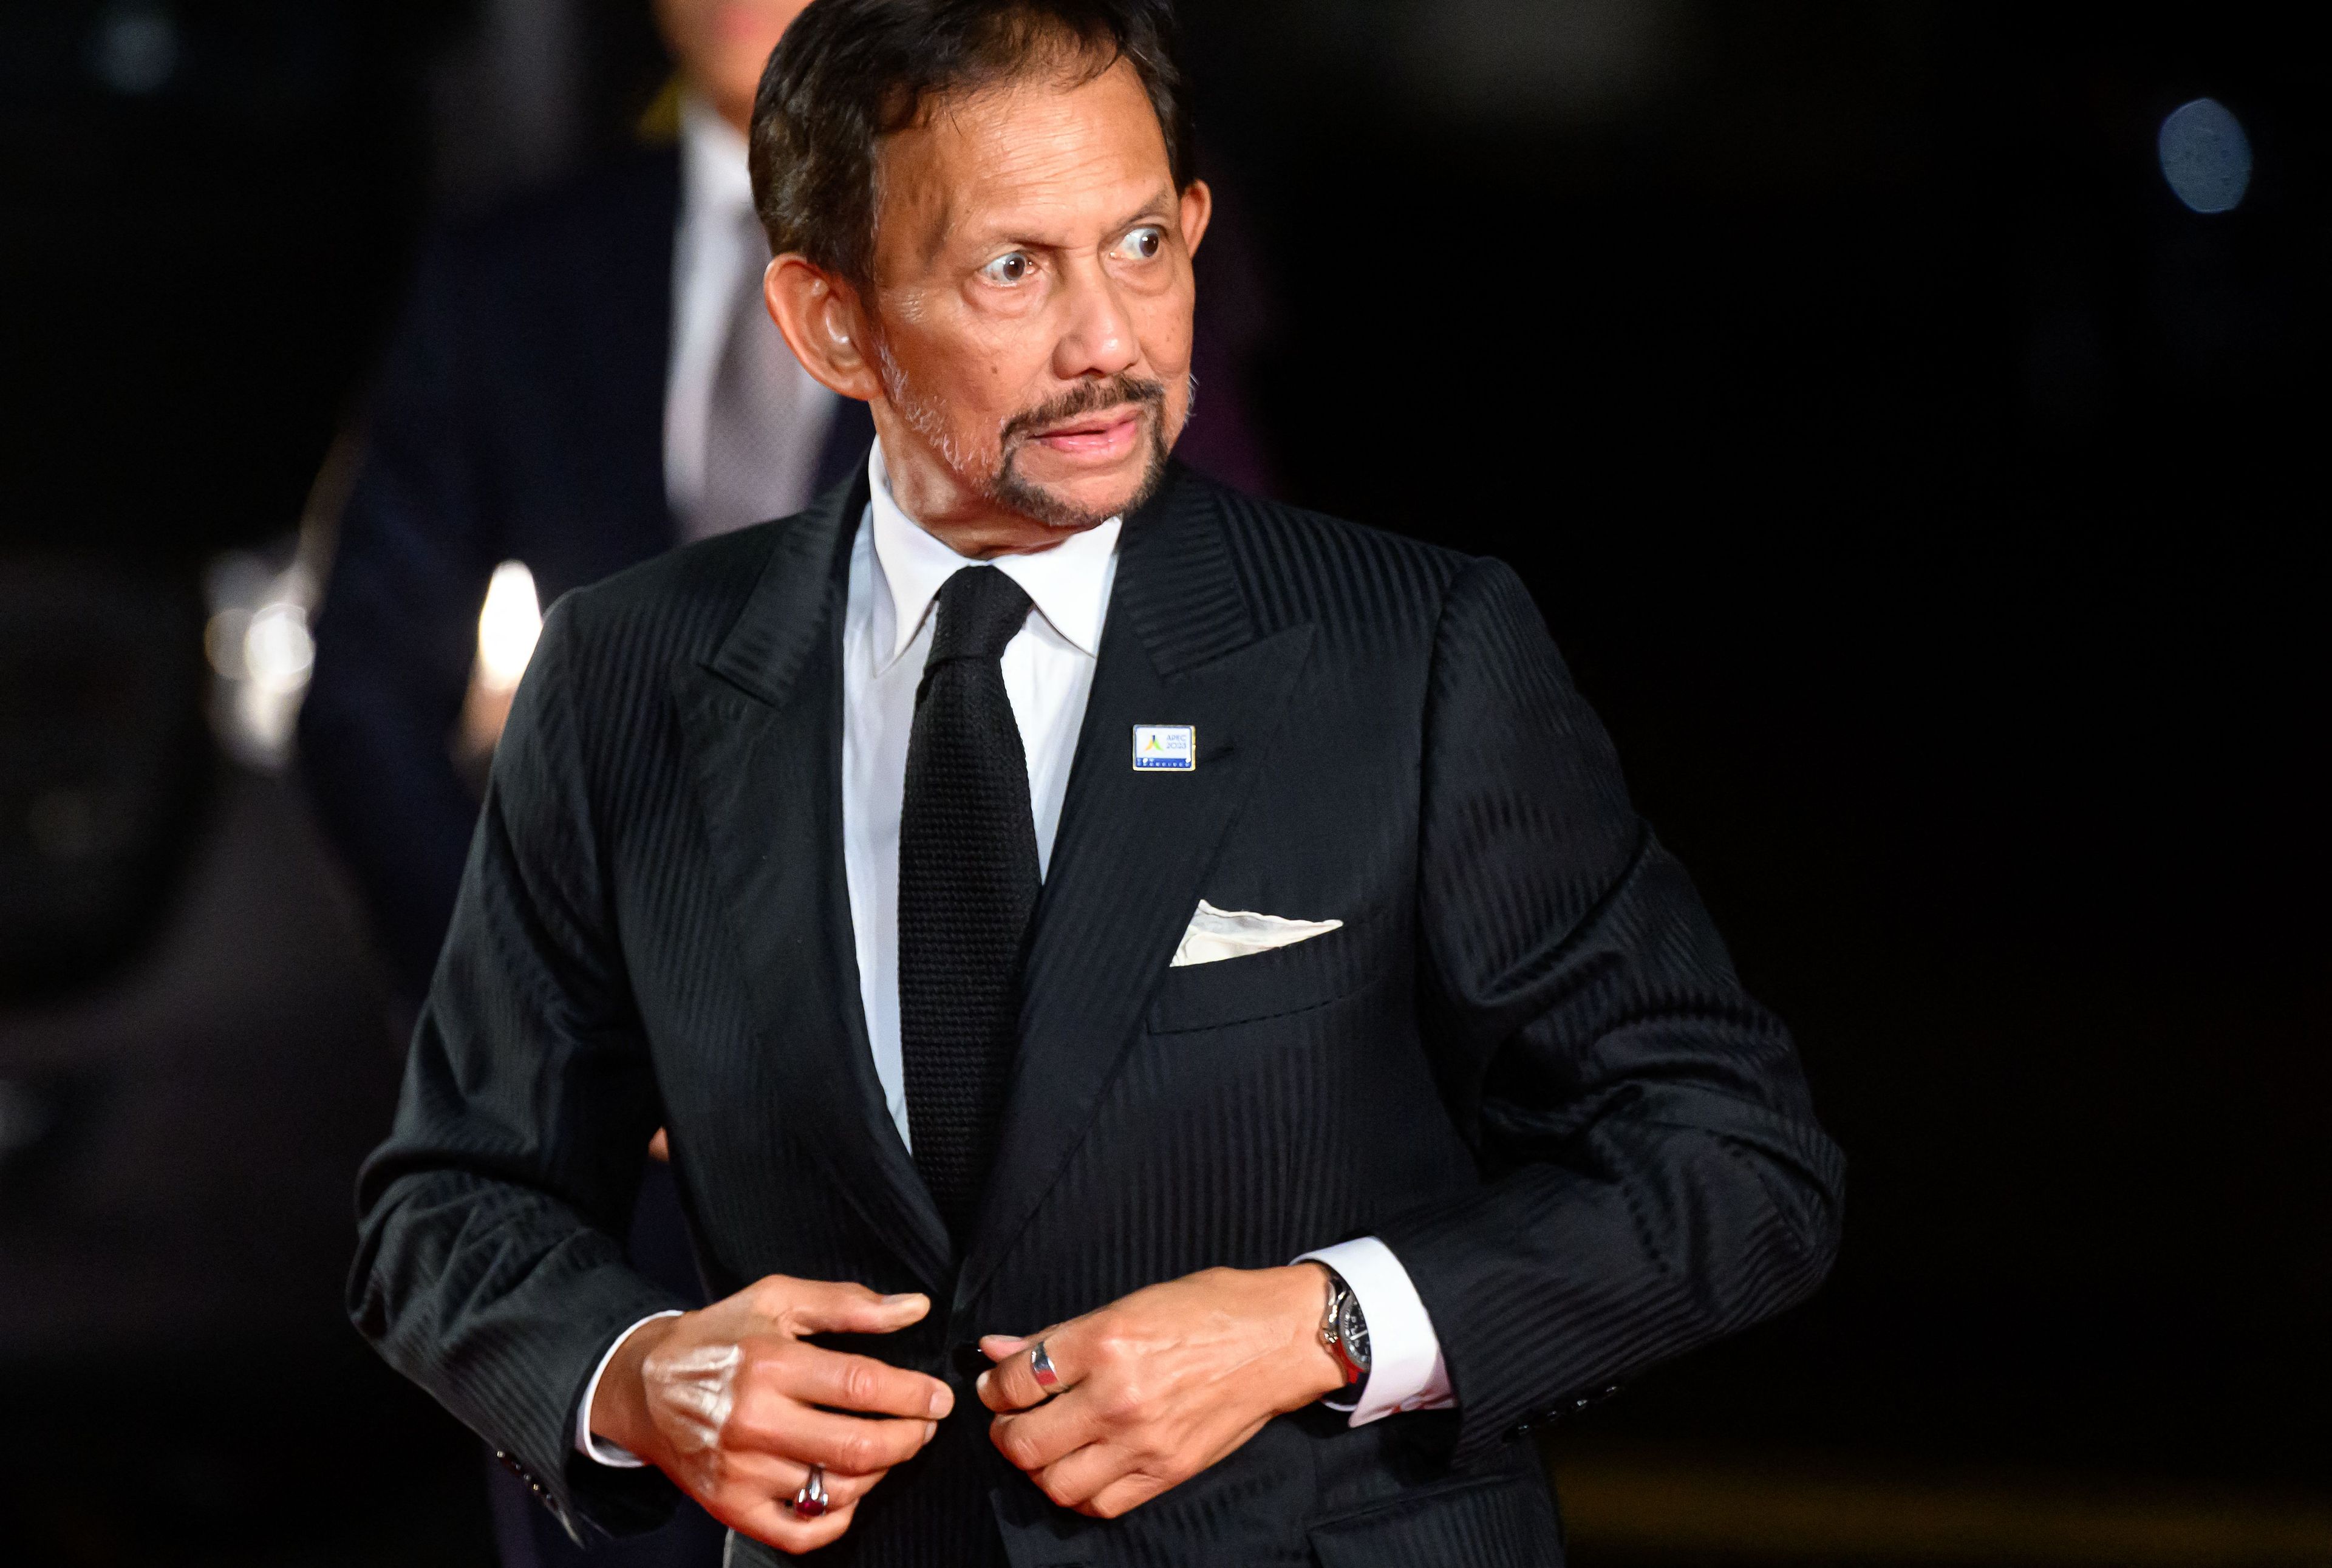 Brunei's Sultan Hassanal Bolkiah buttons up his suit while looking off camera.